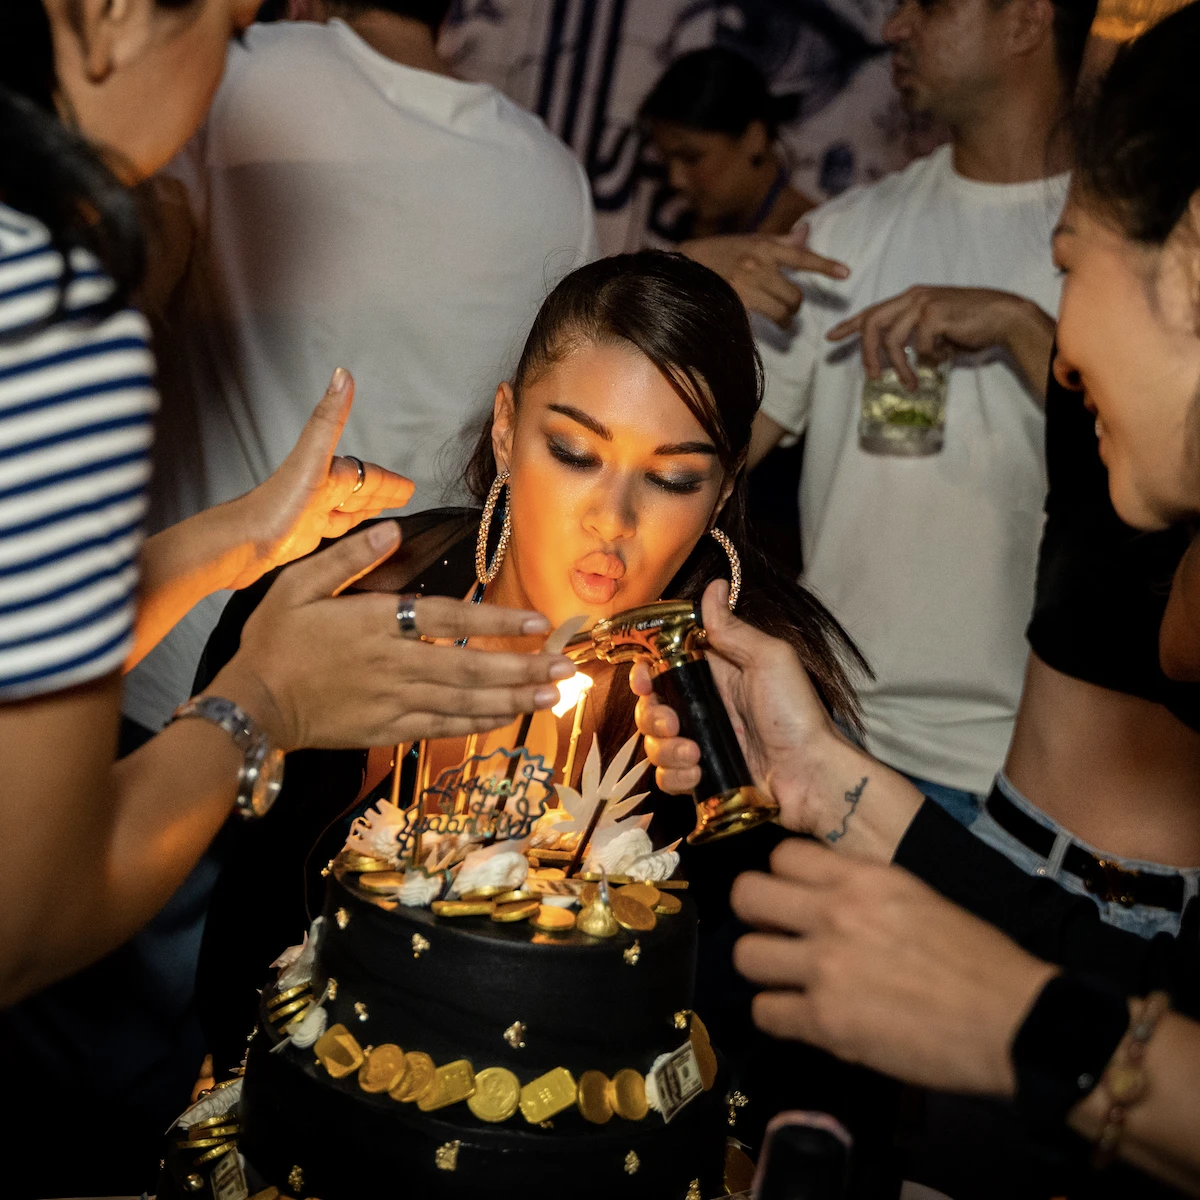 Thai model blowing up candles on a birthday cake during her birthday party at Pastel Bangkok